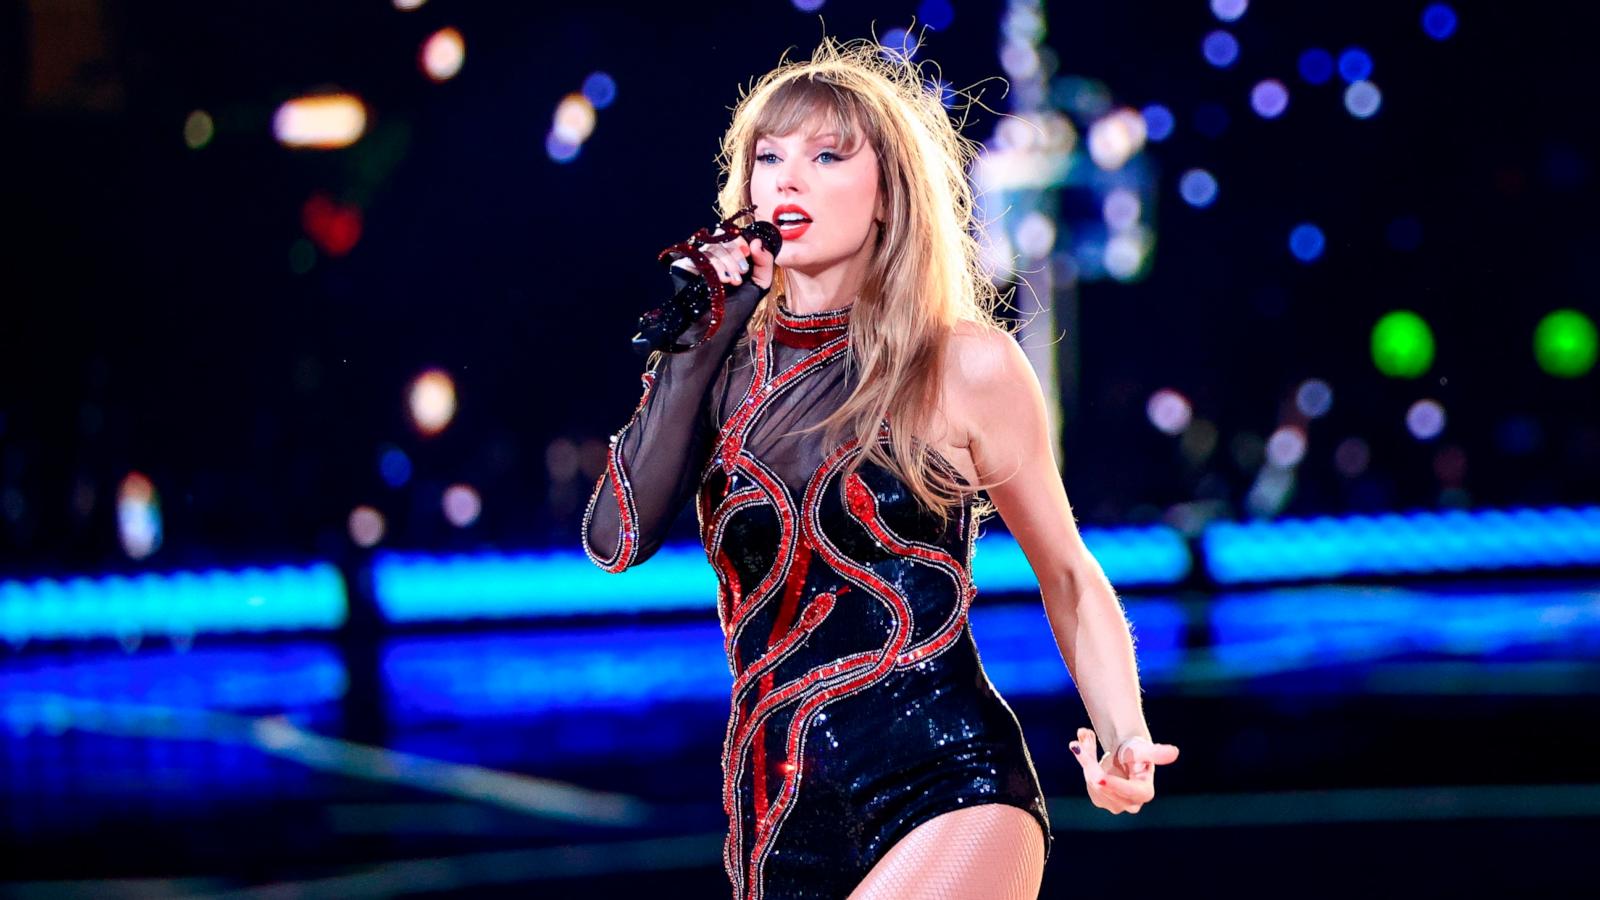 Taylor Swift Eras Tour Concert Film arrives a day early as reviews